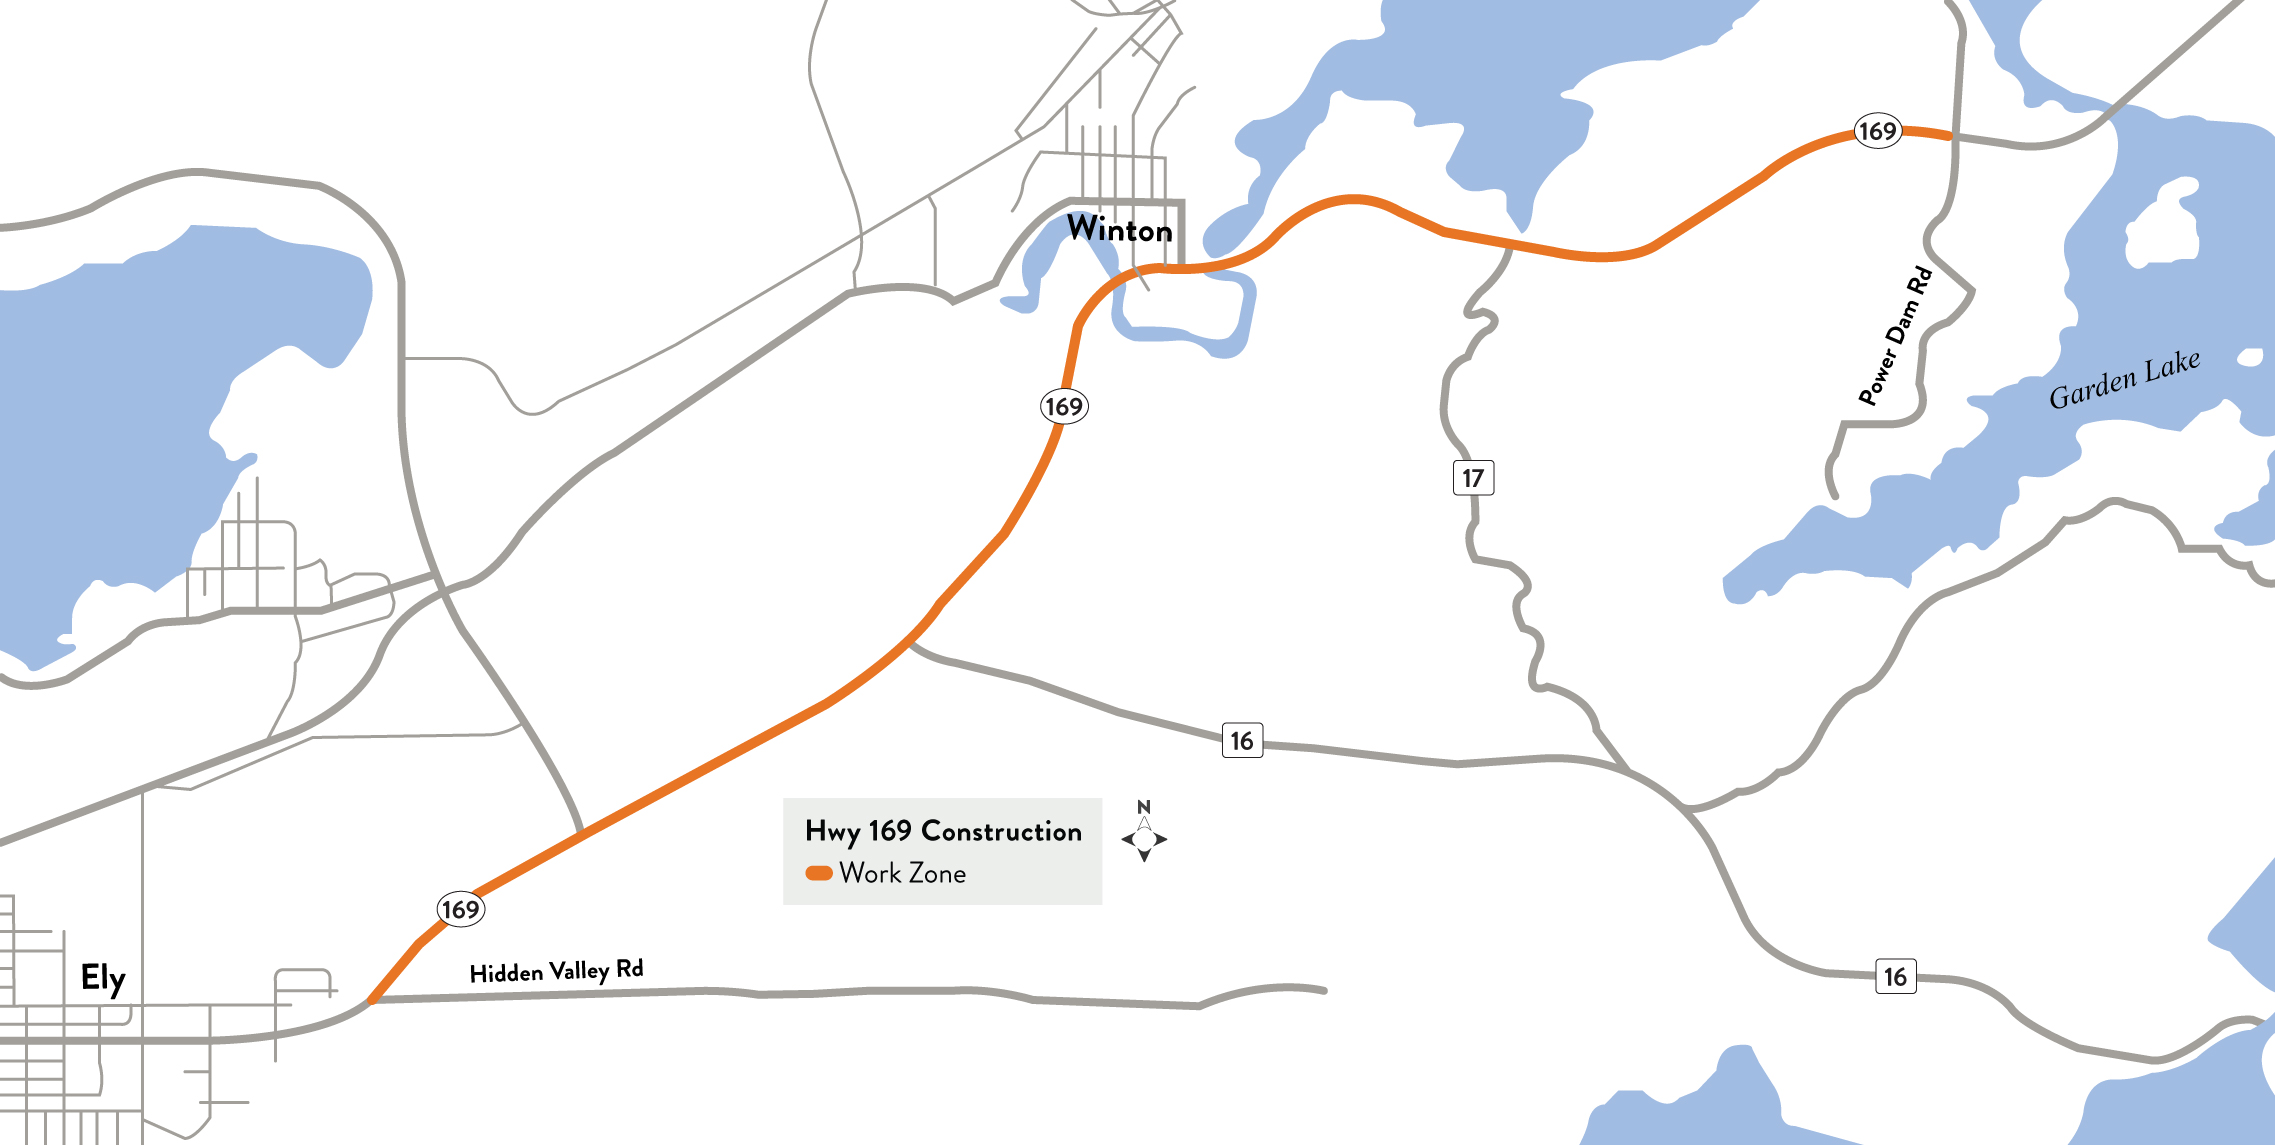 A rendering of the Hwy 169 project from Ely to Winton.